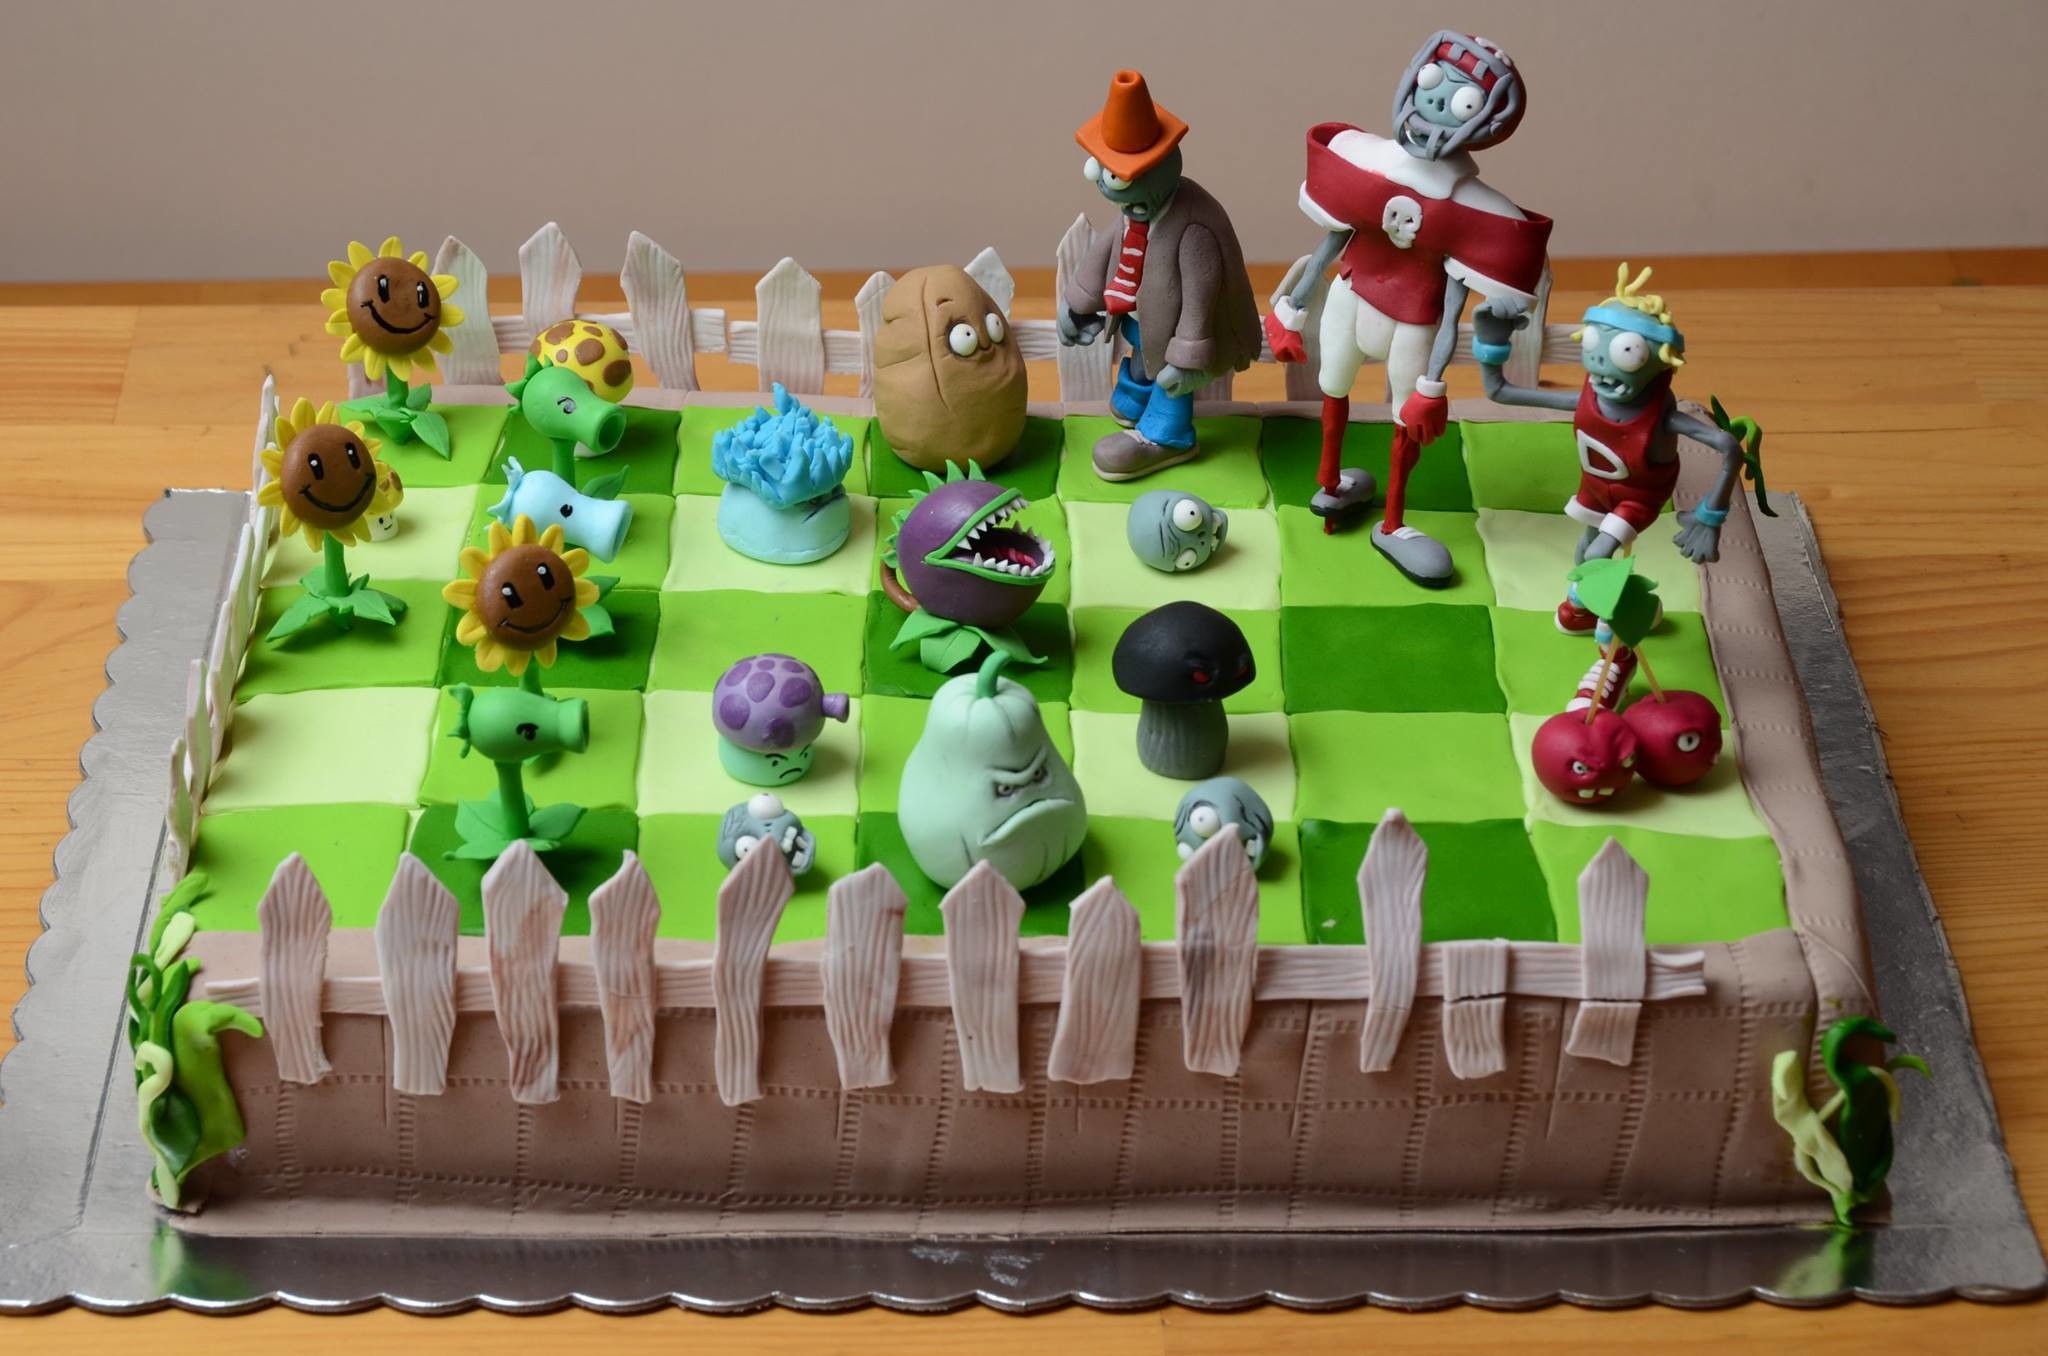 2048x1356 Plants vs. Zombies images plants vs zombies cake HD wallpaper and  background photos